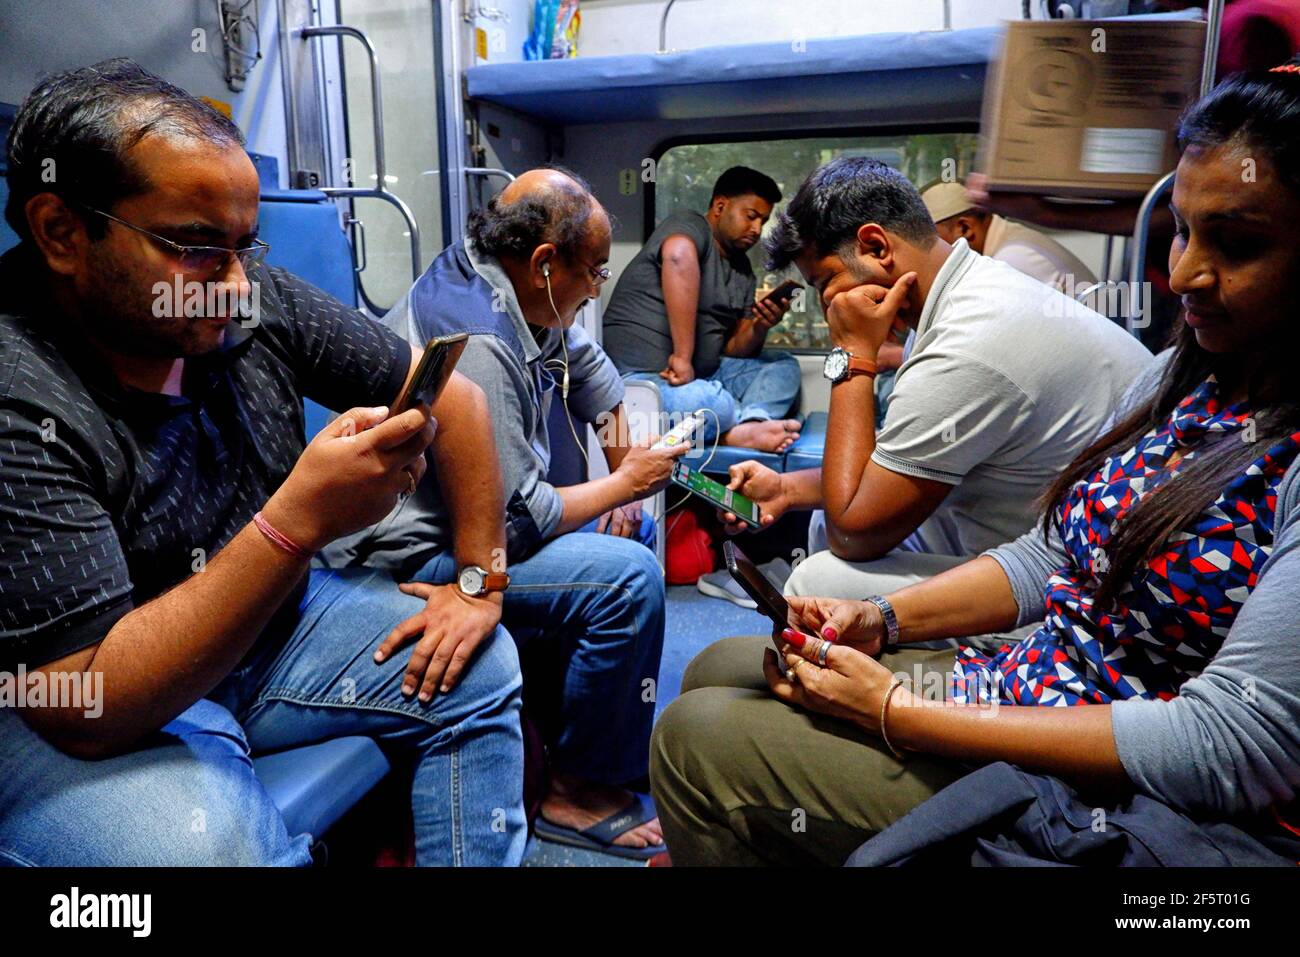 Delhi, India. 21st Mar, 2021. Passengers are seen browsing their Mobile Phones inside a Railway Coach of Rajdhani Express without wearing any protective gears.India has recorded 61187 new Covid 19 cases on March 27, 2021 where the government plans to re inforce lockdown/containment measures from April 2021 onwards to tackle the Second wave of the Covid 19 pandemic. Credit: Avishek Das/SOPA Images/ZUMA Wire/Alamy Live News Stock Photo